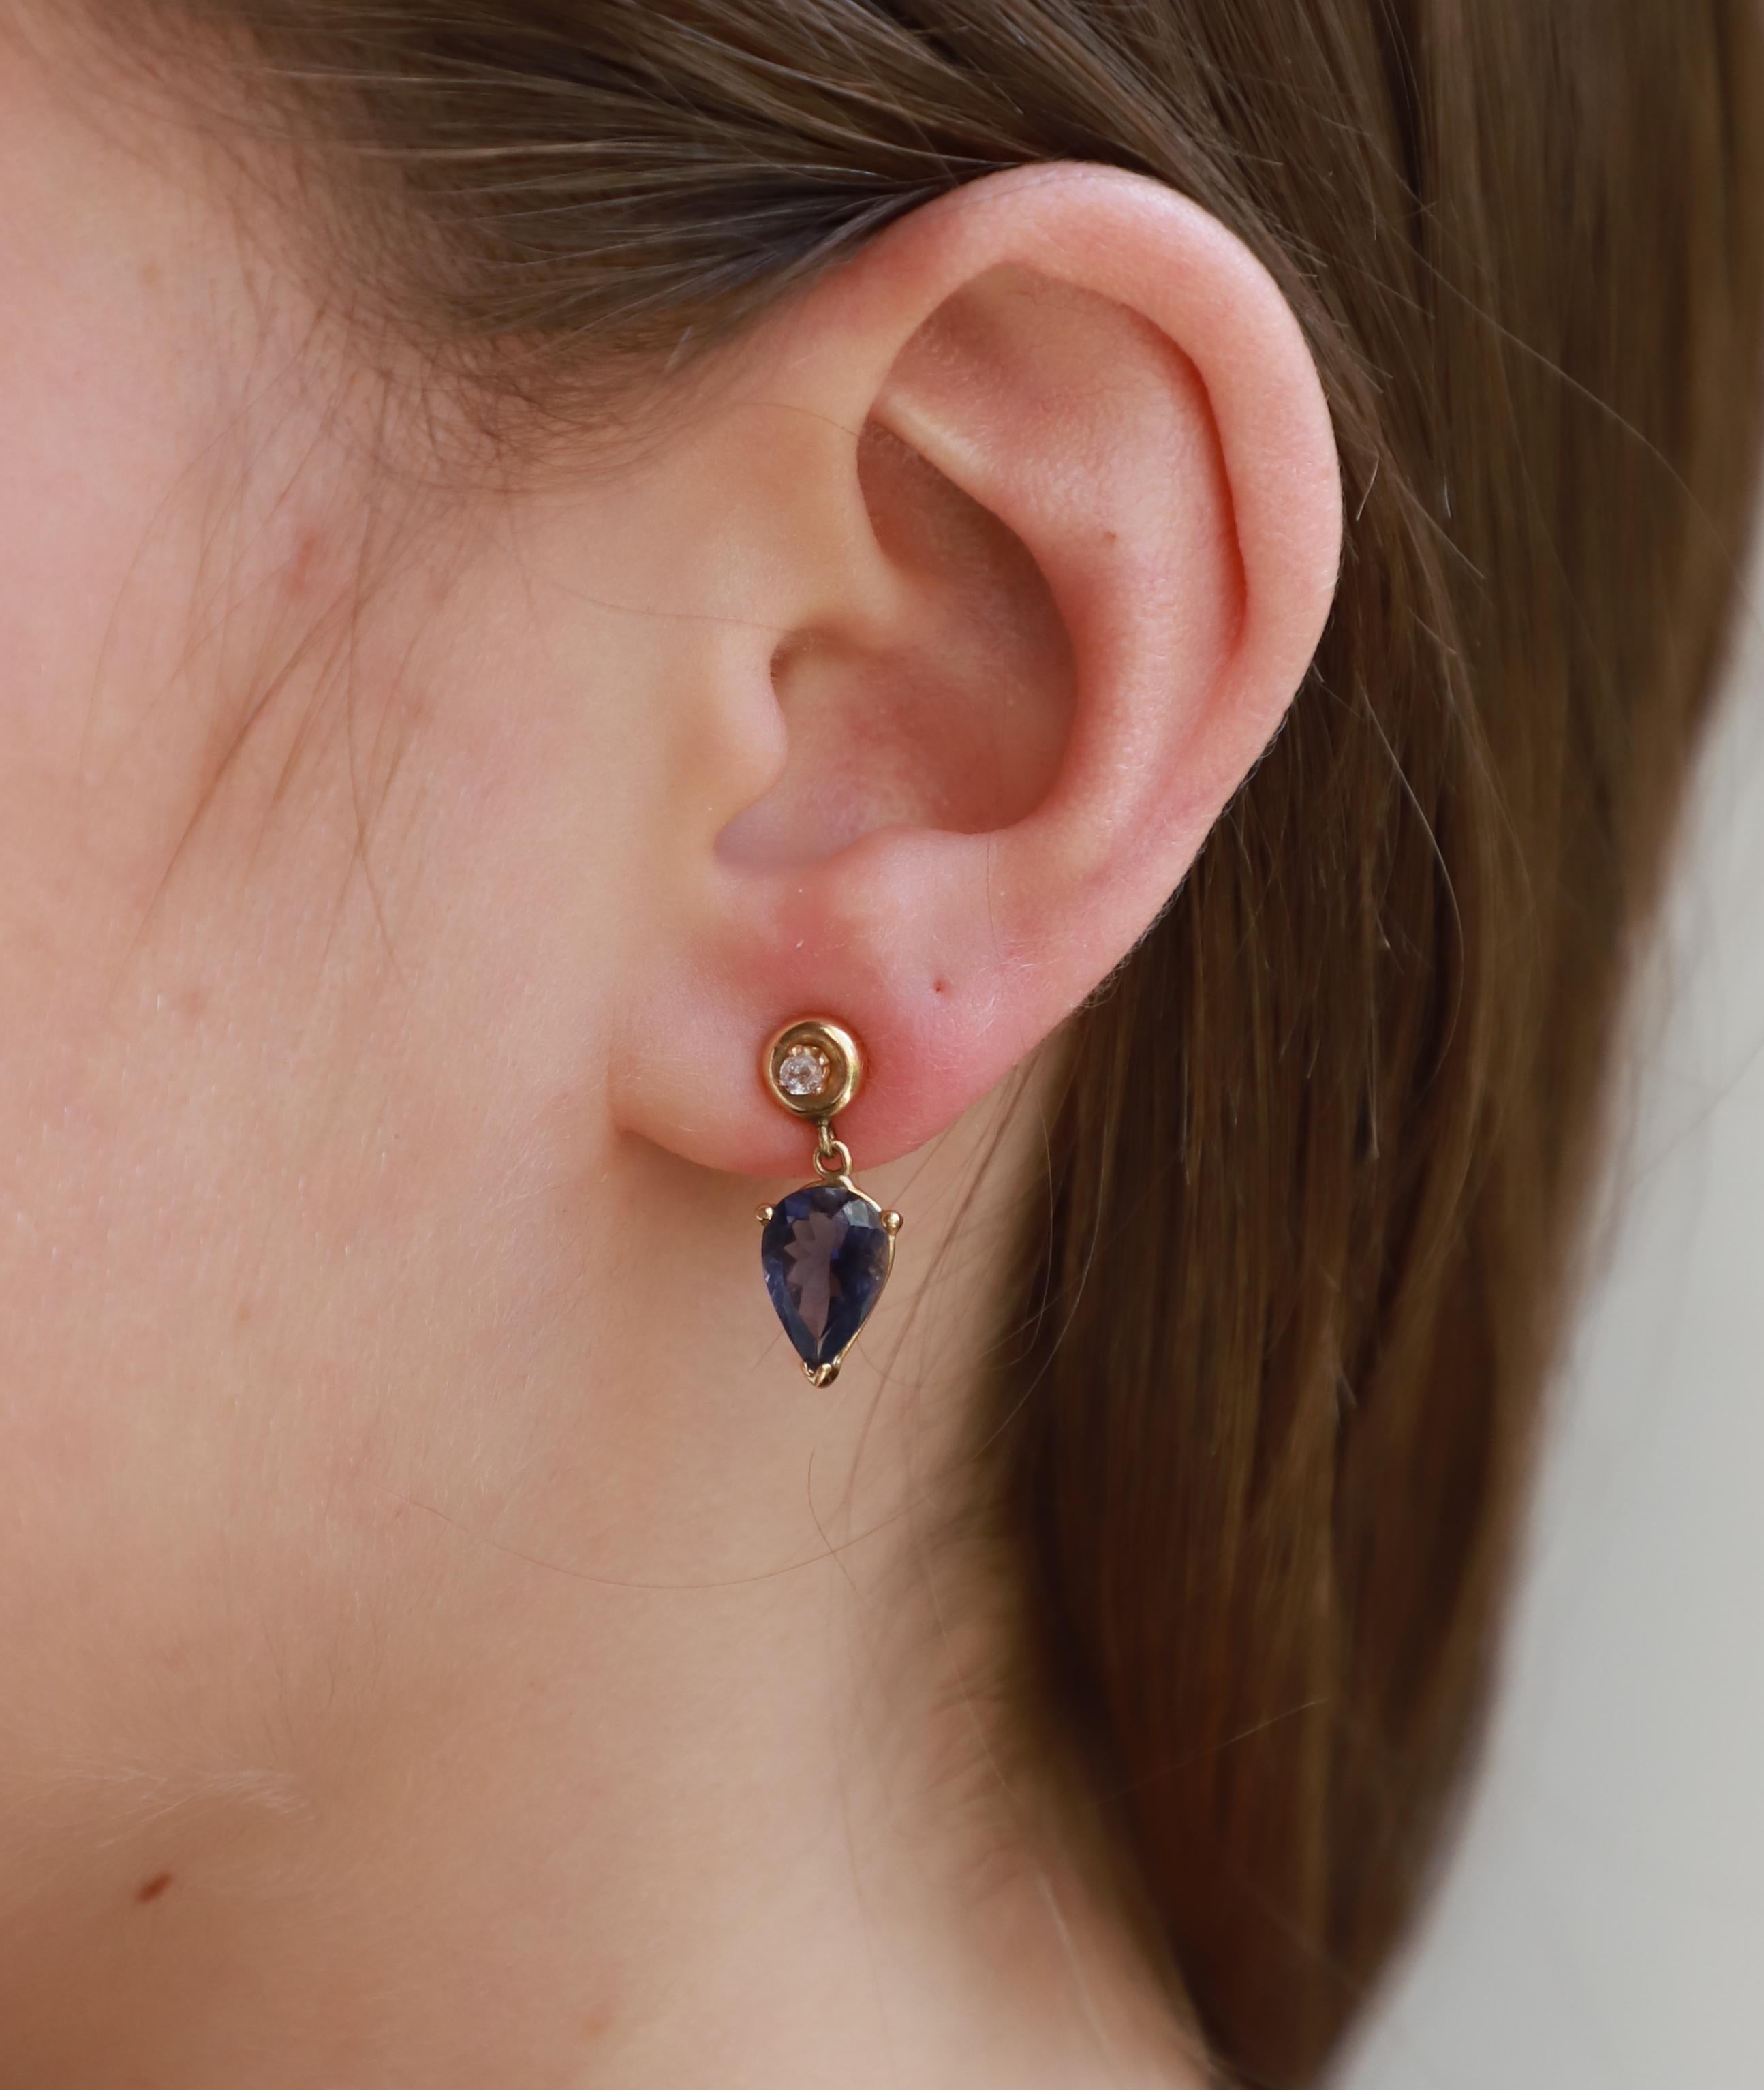 Rossella Ugolini Design Collection, Classy drop earrings handcrafted in 18 karat yellow gold and  embellished with a deep Indigo Blue of Iolite stone and 0.10 karat Grey Diamonds.
A simple design earring with the tip of the drop-shaped Iolite stone